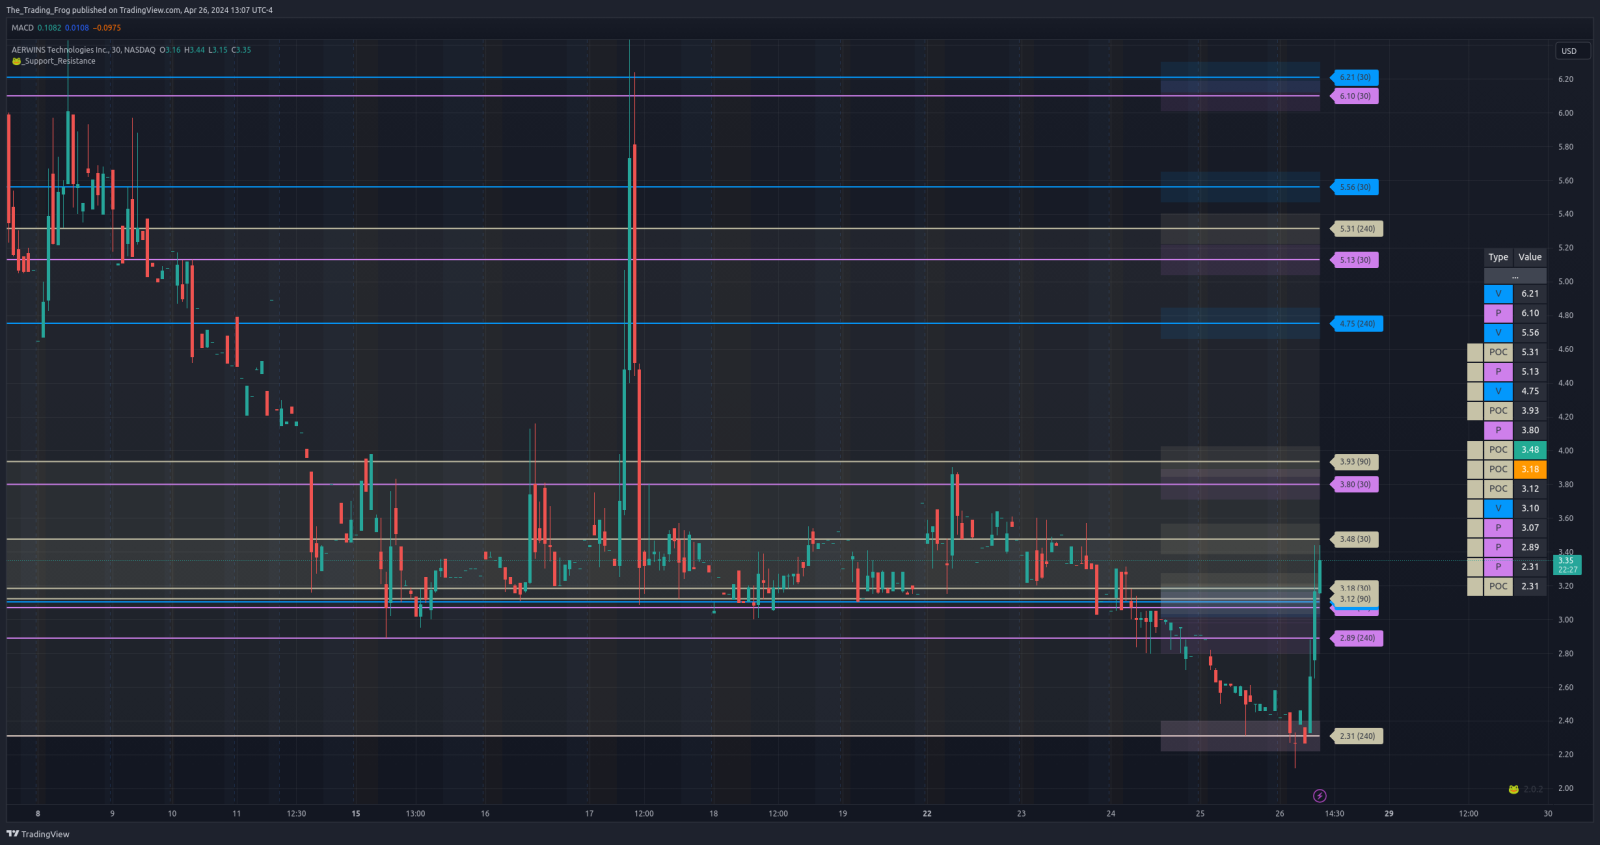 $AWIN Support / Resistance Levels